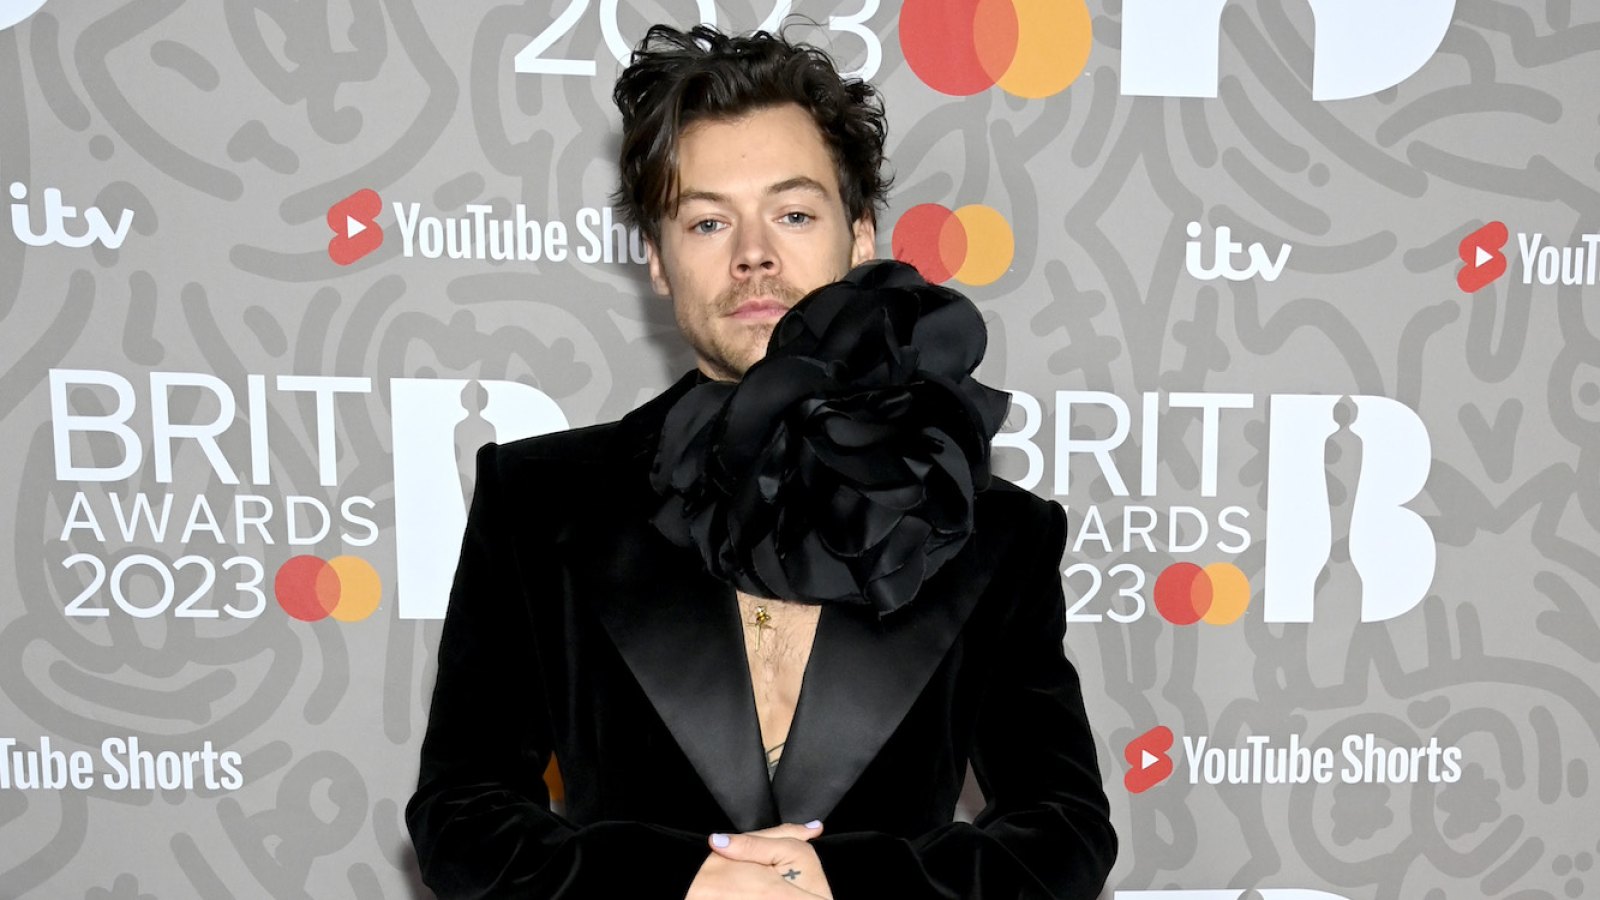 Harry Styles Owes Comedian Joe Lycett Payment in the Form of a Kit Kat For a Painting